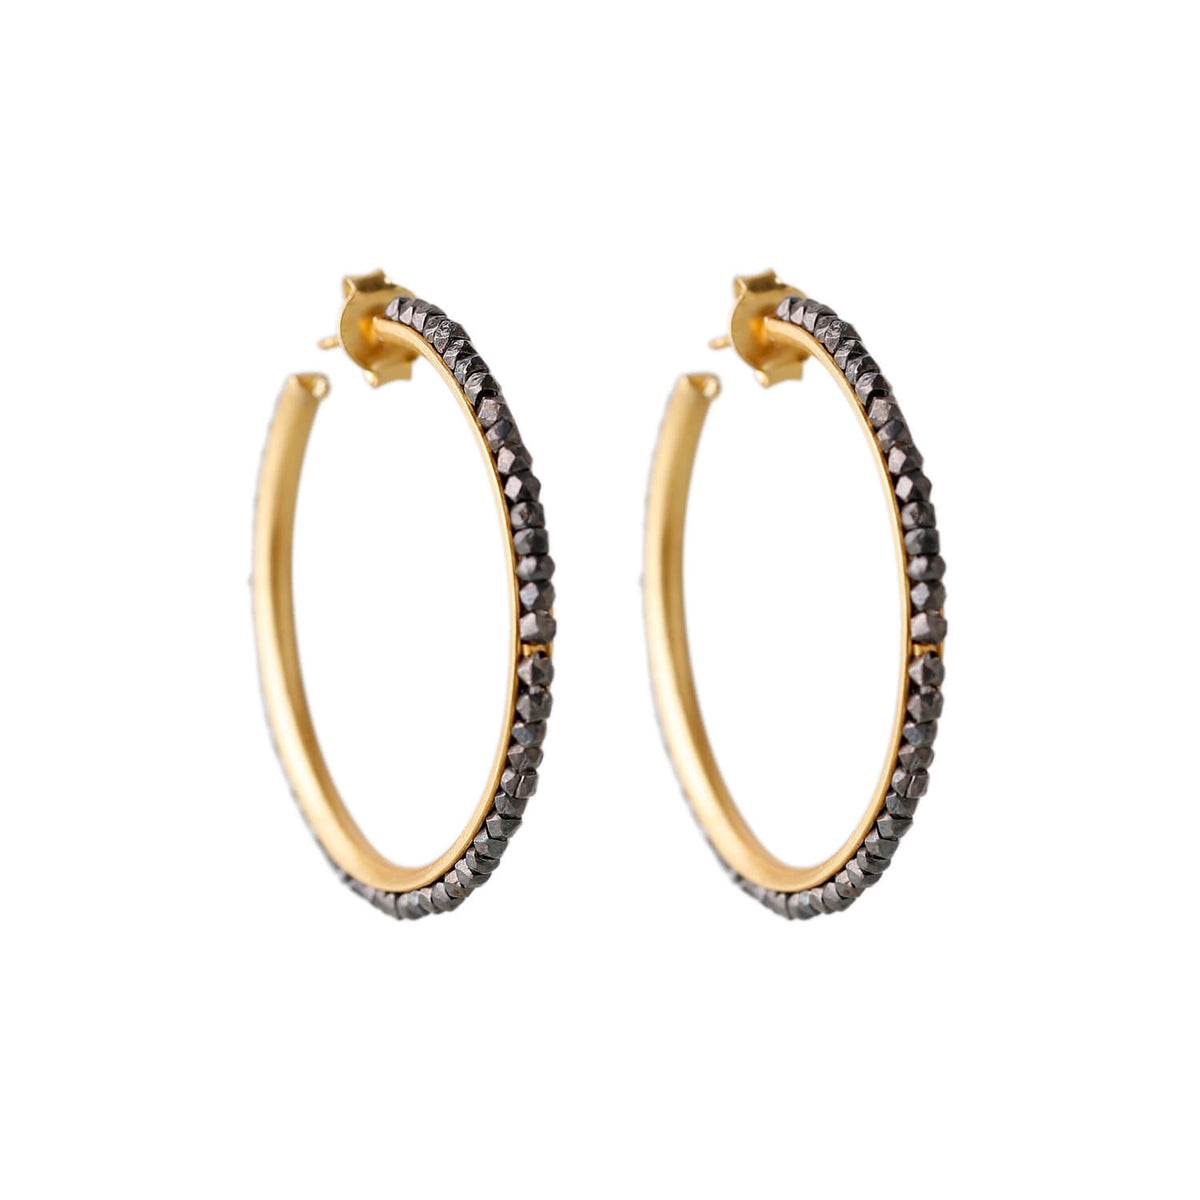 Shady Black and Gold Earrings